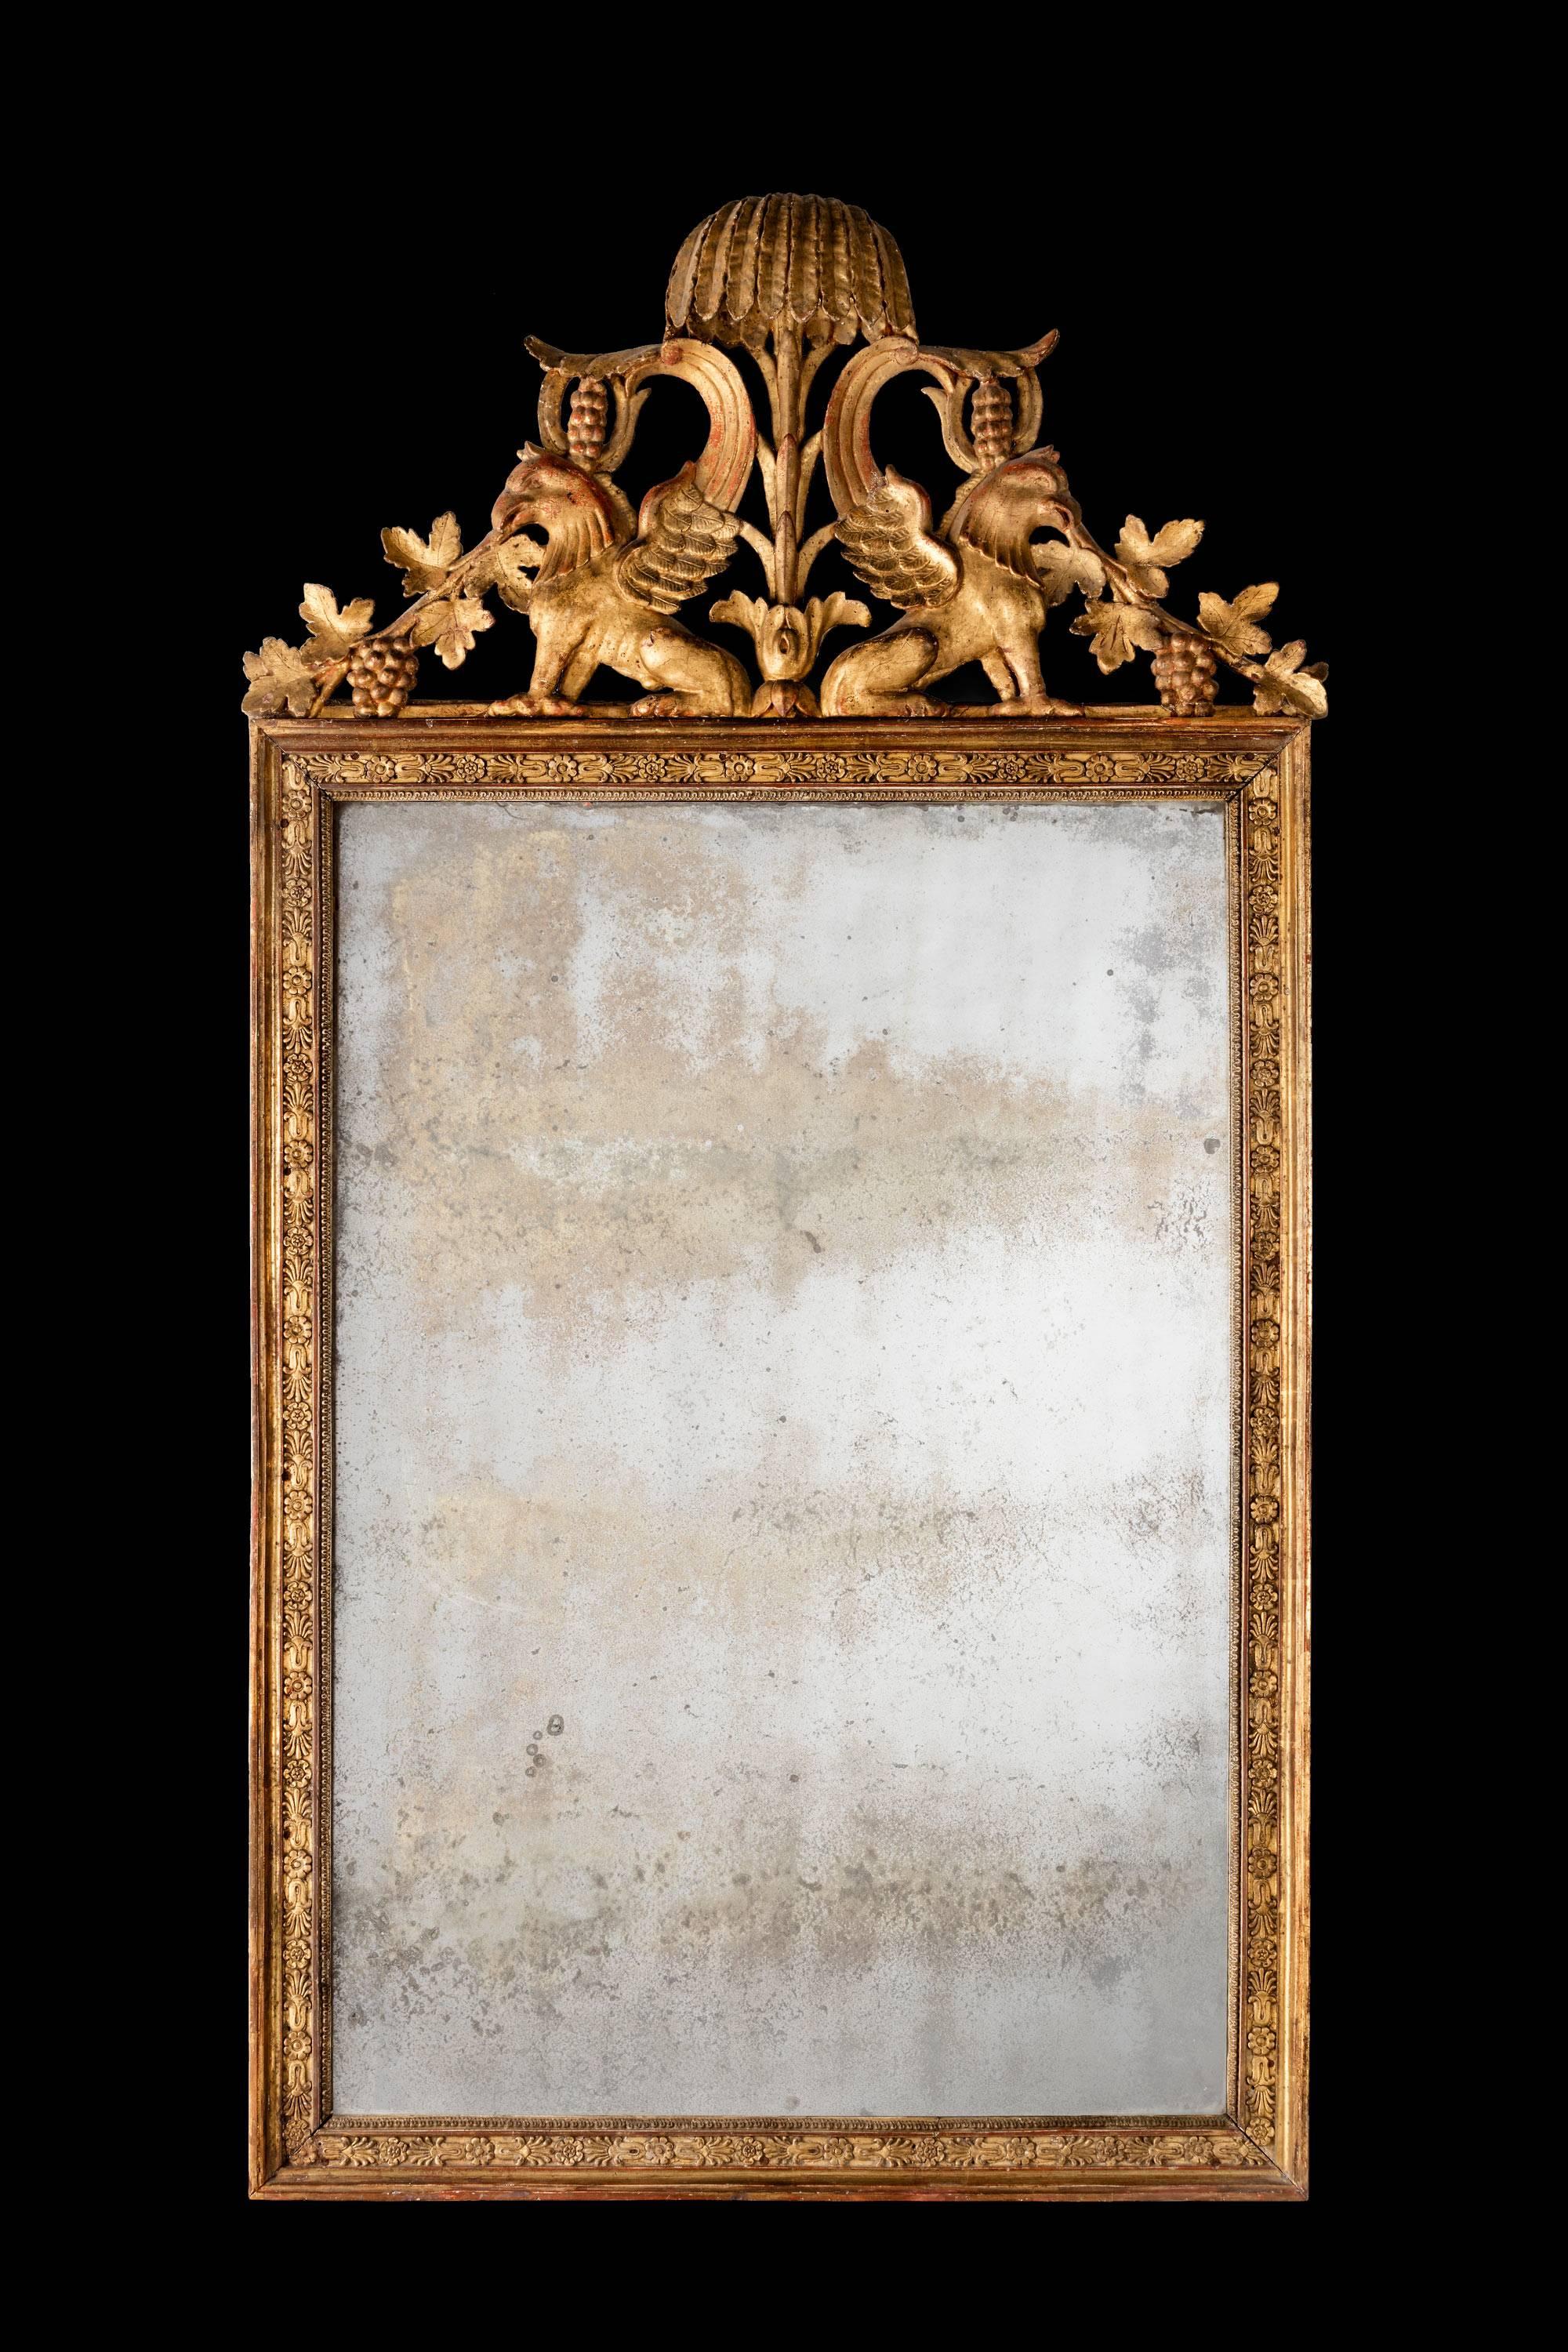 Great Britain (UK) Mid 18th Century Continental Giltwood Mirror